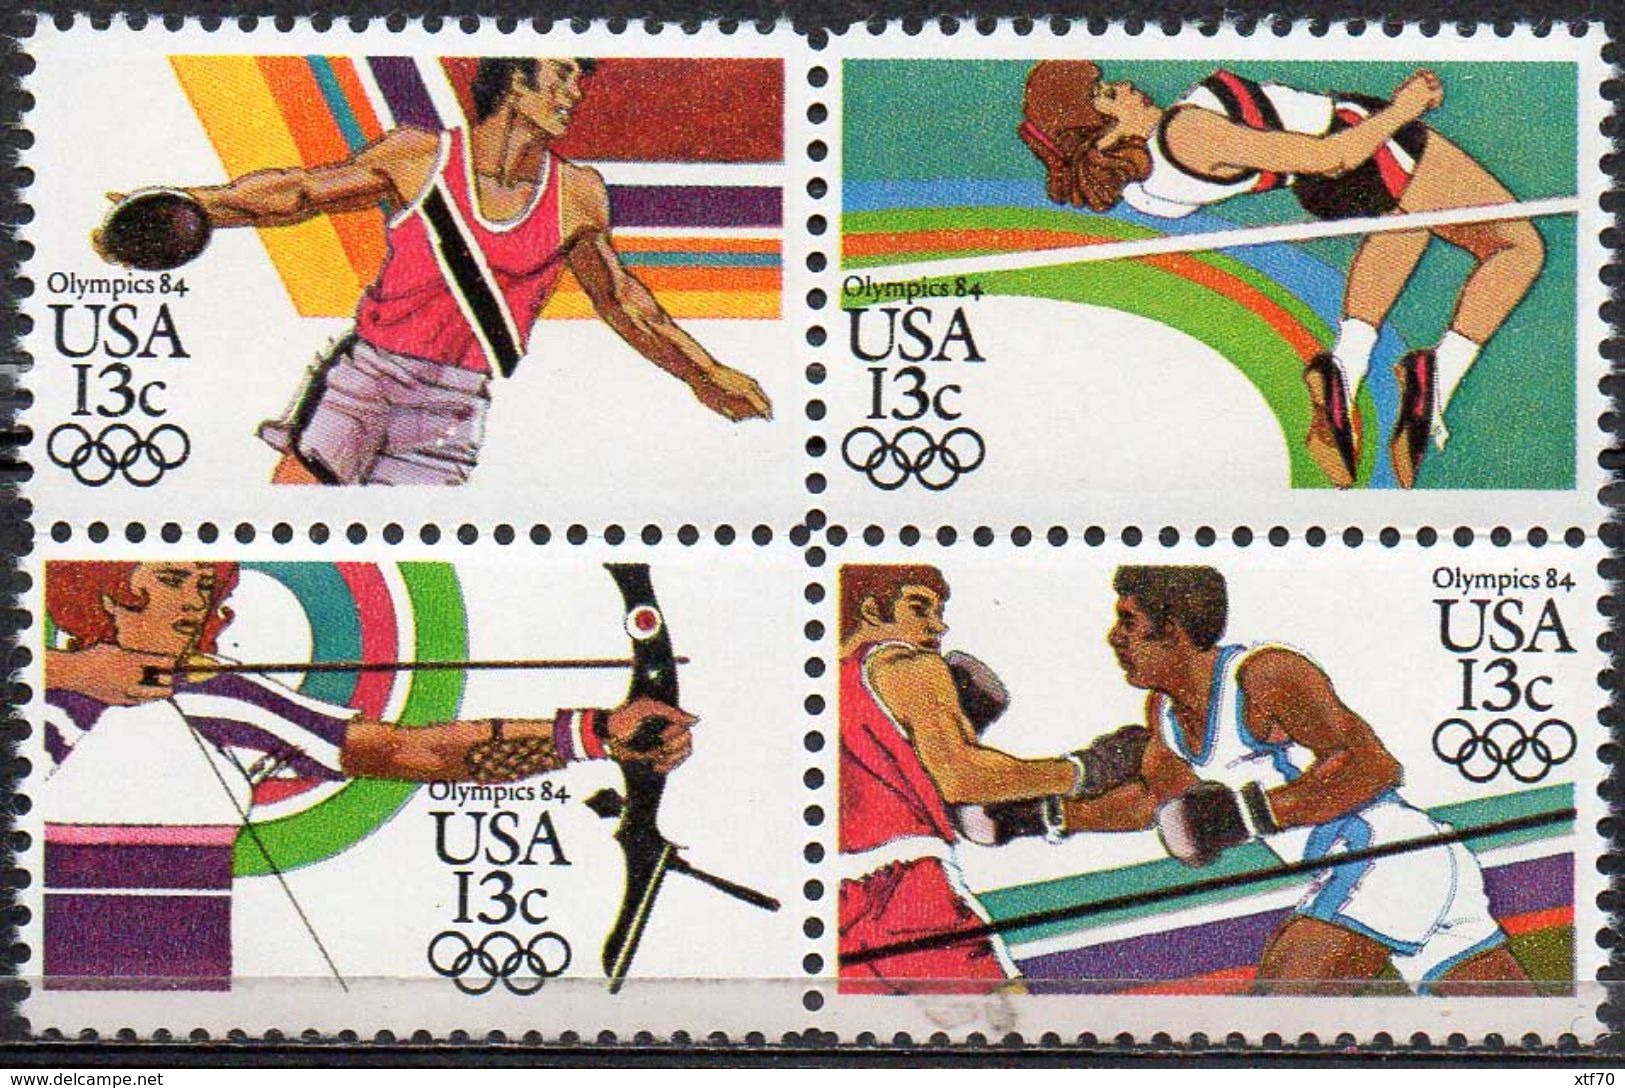 U.S.A. 1983 Olympic Games - Unused Stamps